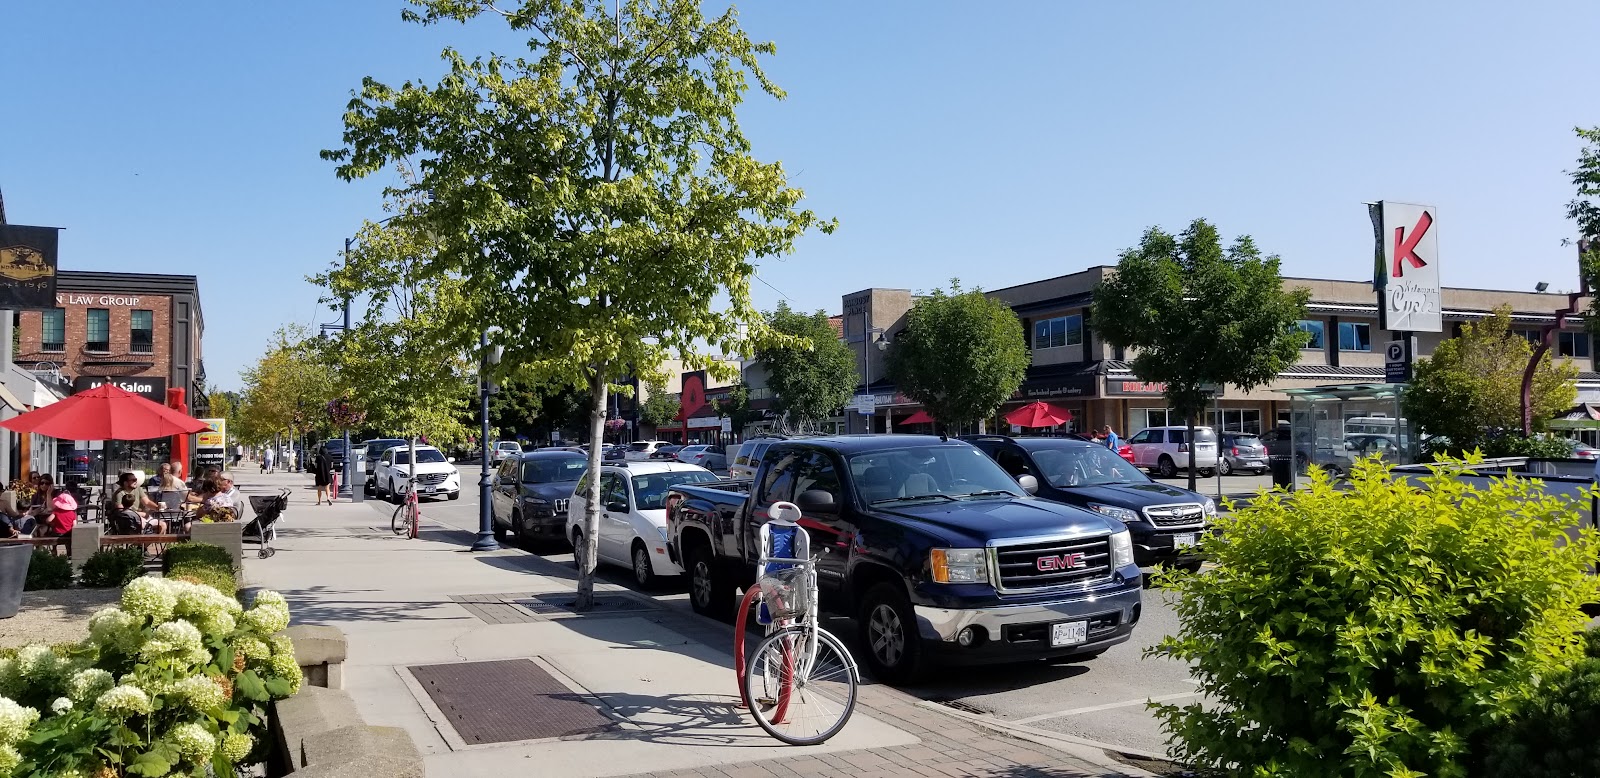 Cars and bicycles parked on the street on Pandosy Ave.